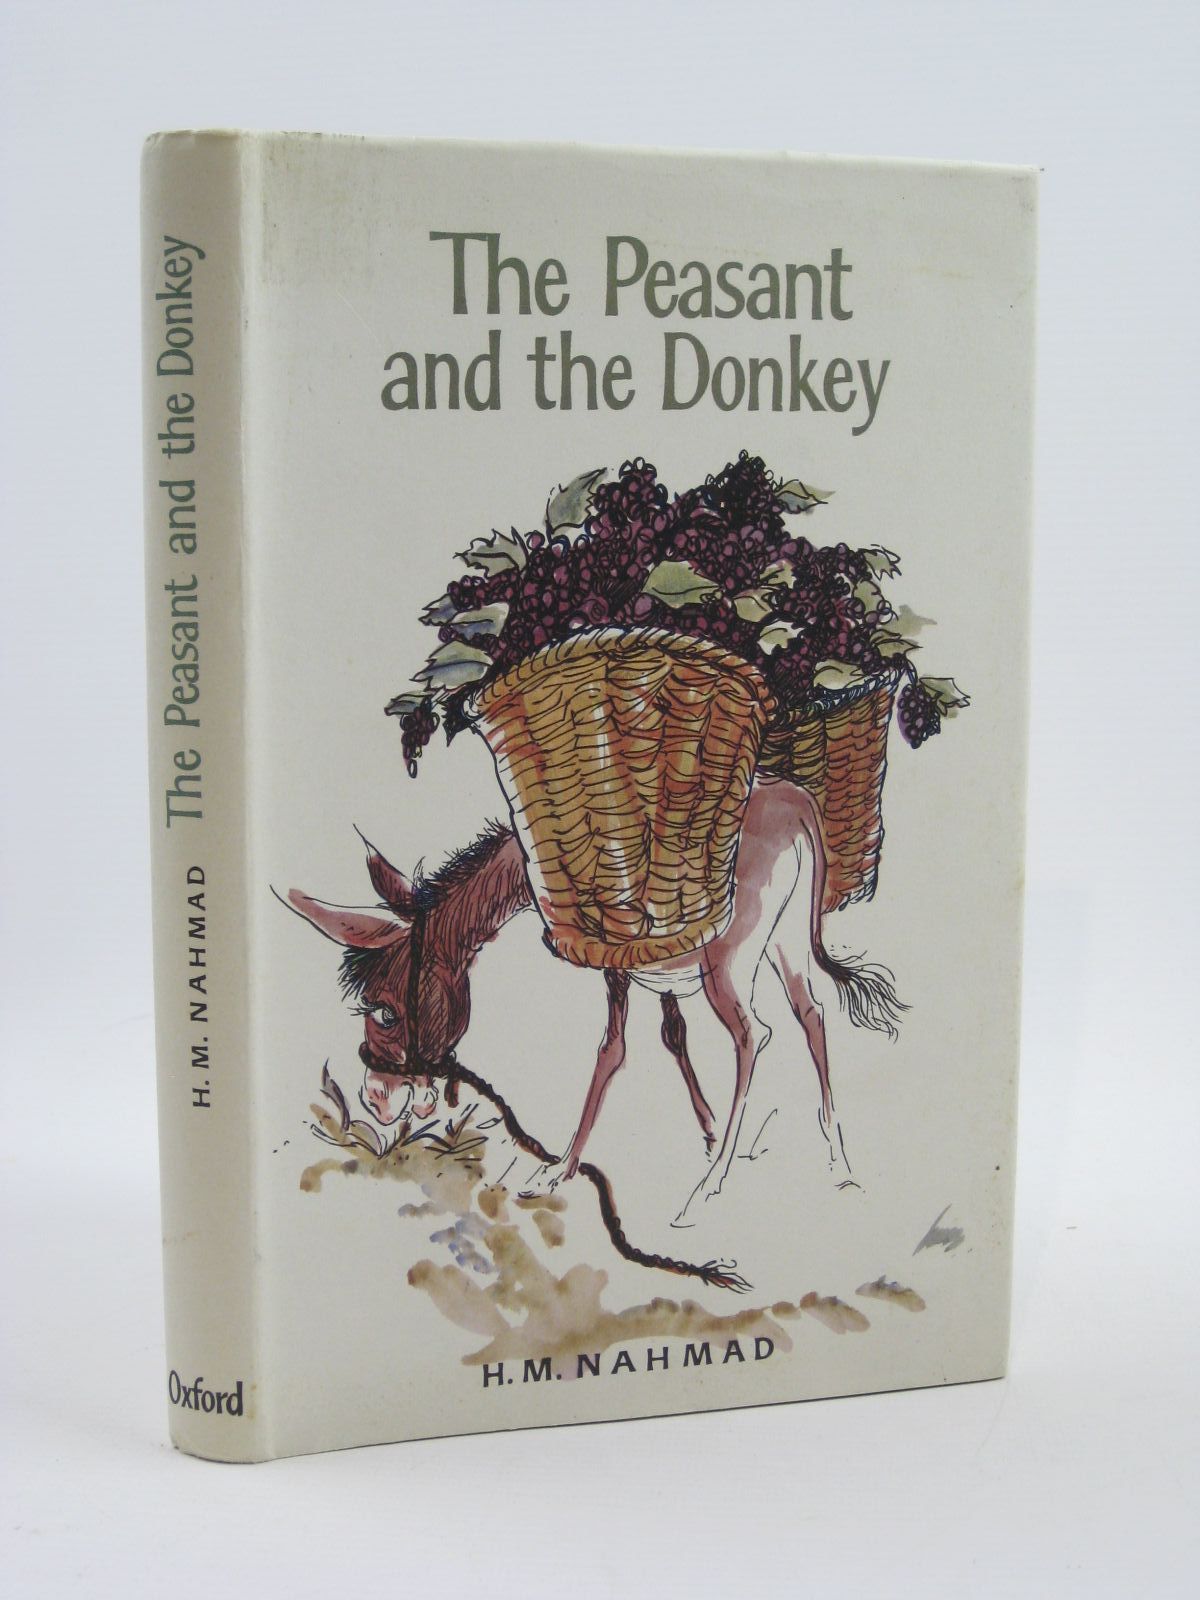 Cover of THE PEASANT AND THE DONKEY by H.M. Nahmad